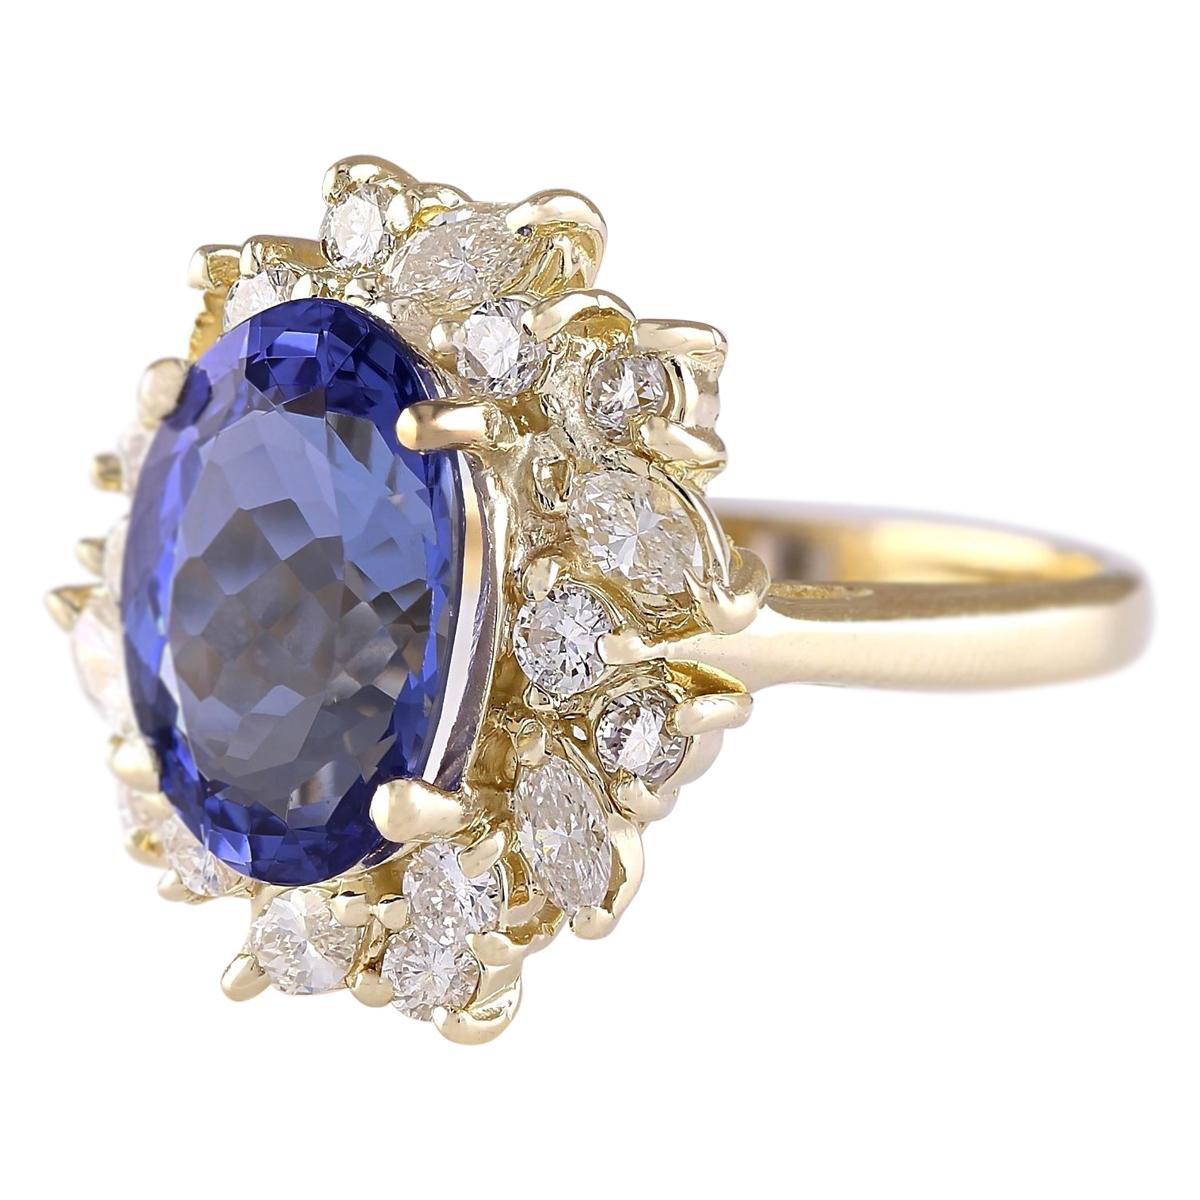 Introducing our captivating 14 Karat Yellow Gold Diamond Ring featuring a stunning 6.58 Carat Tanzanite, stamped for authenticity. Crafted with meticulous attention to detail, this ring exudes elegance and sophistication. Weighing 7.6 grams, it